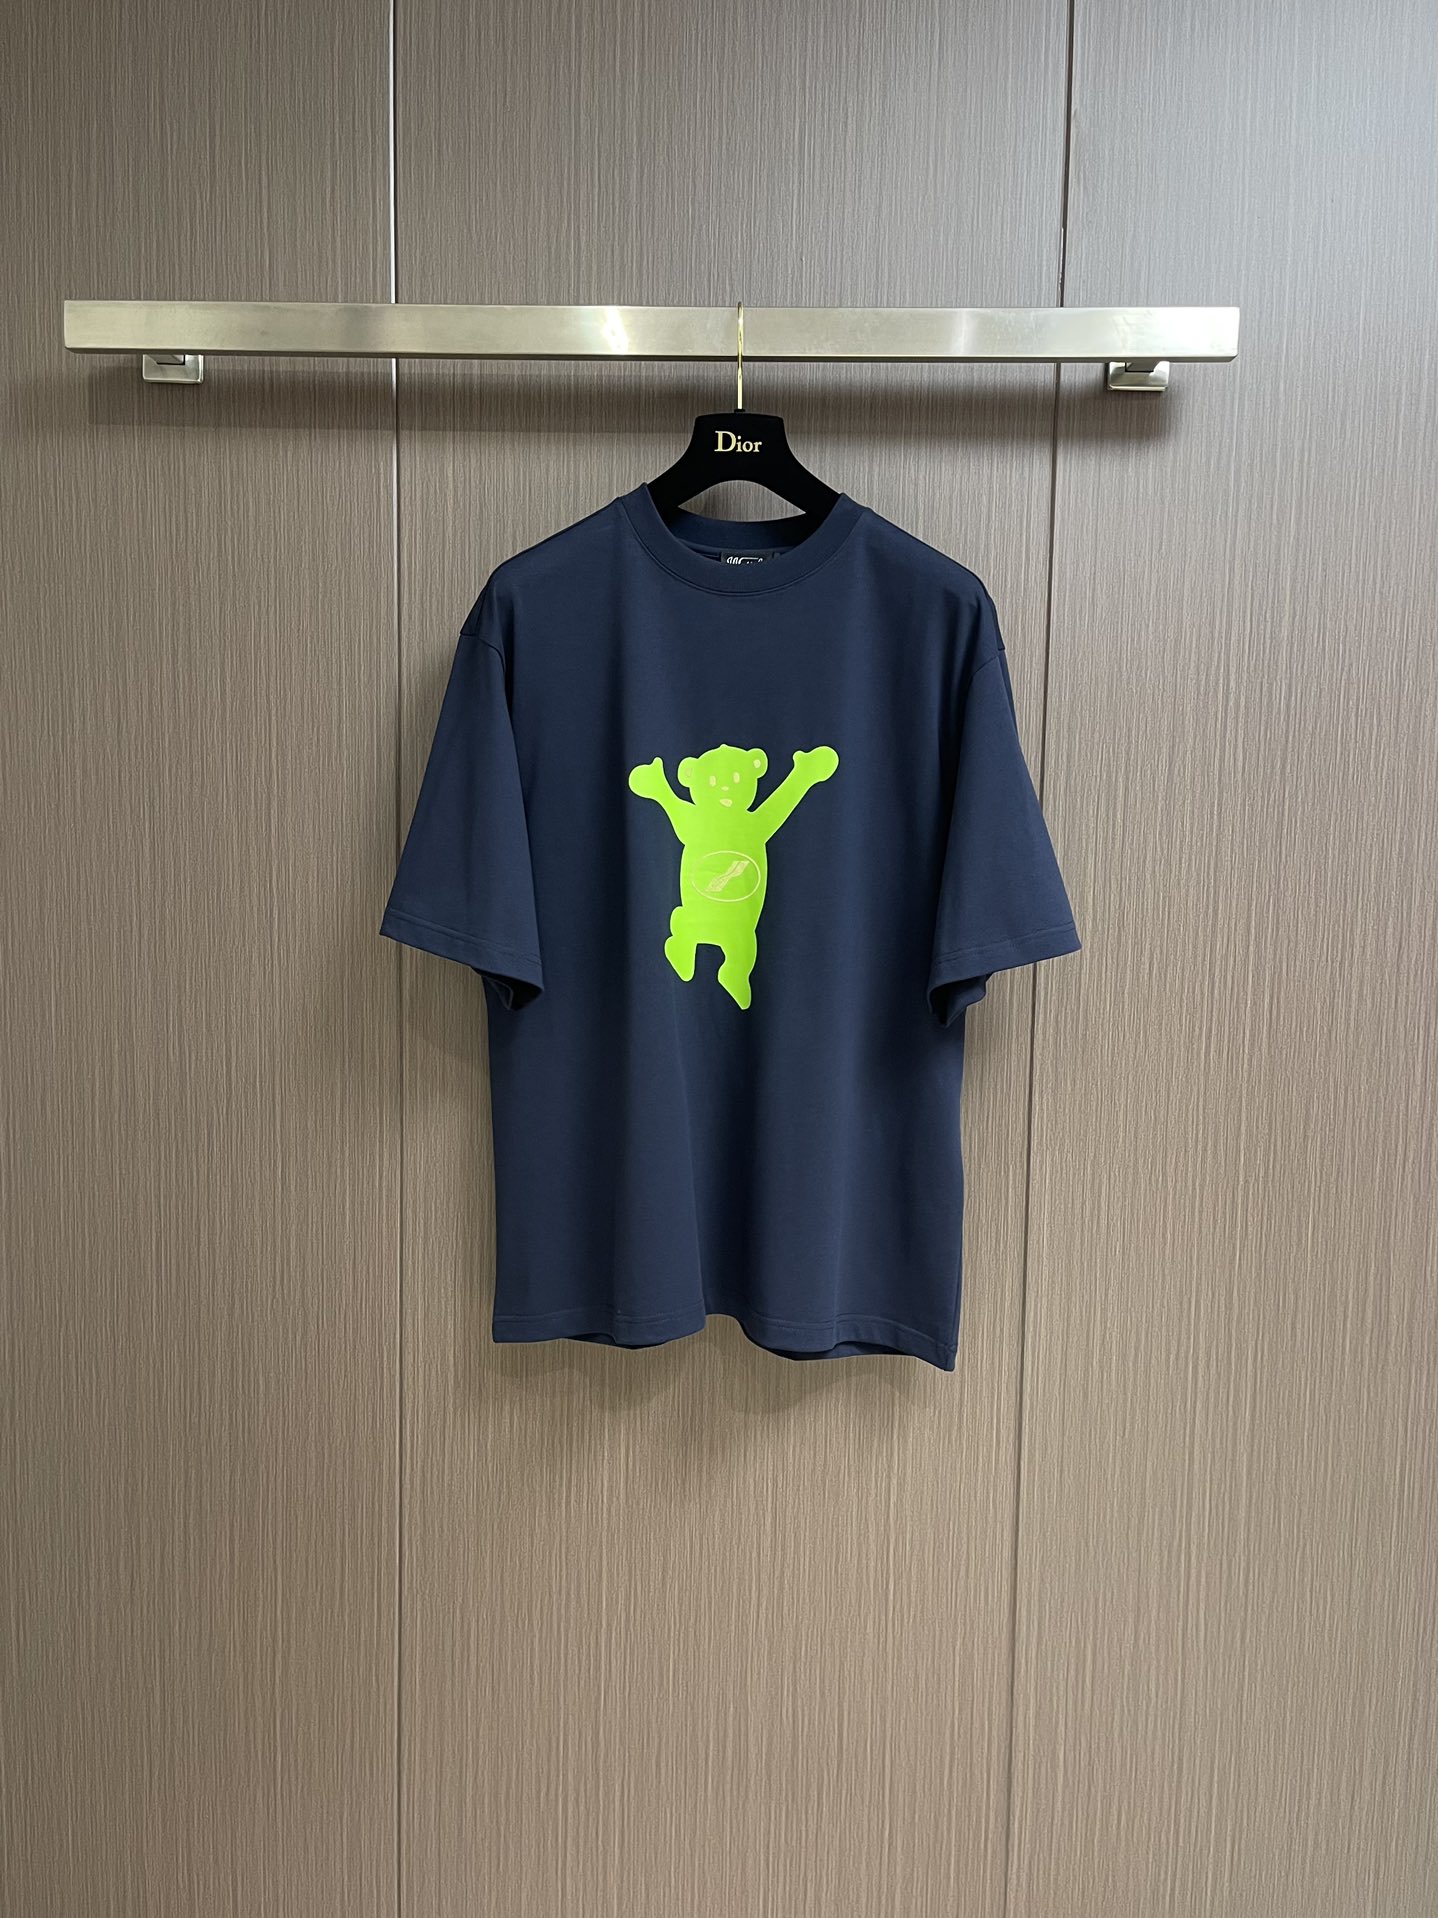 We11done Clothing T-Shirt Fluorescent Green Printing Cotton Short Sleeve